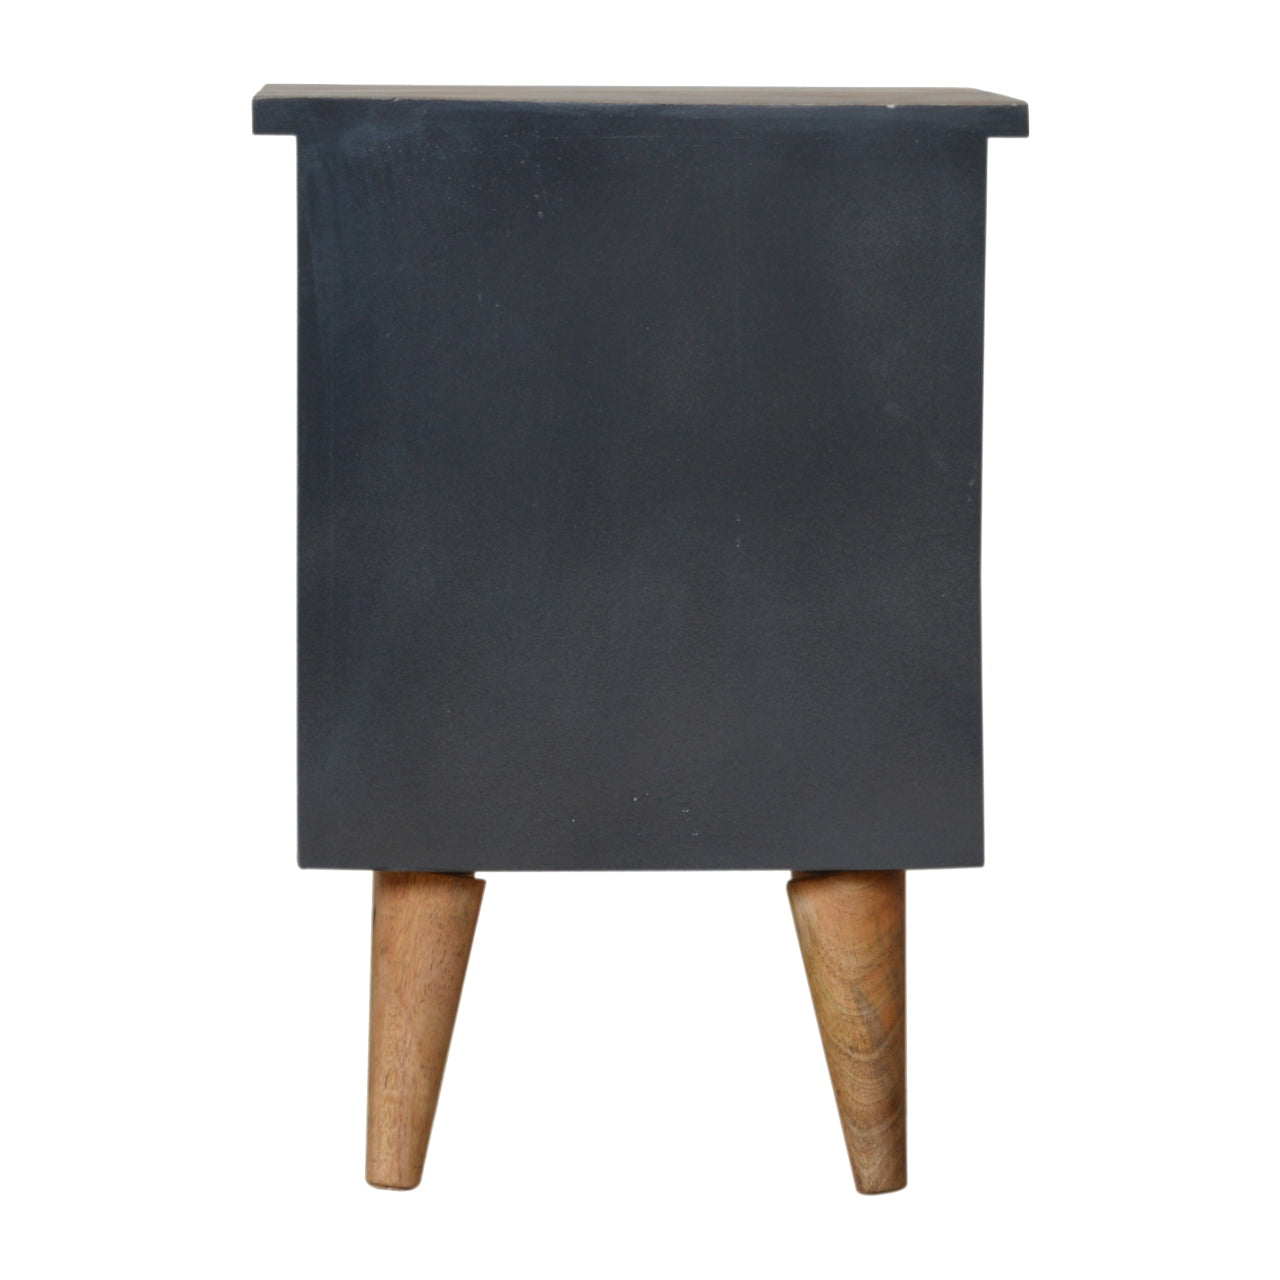 Charcoal Black Hand Painted Artisan Bedside